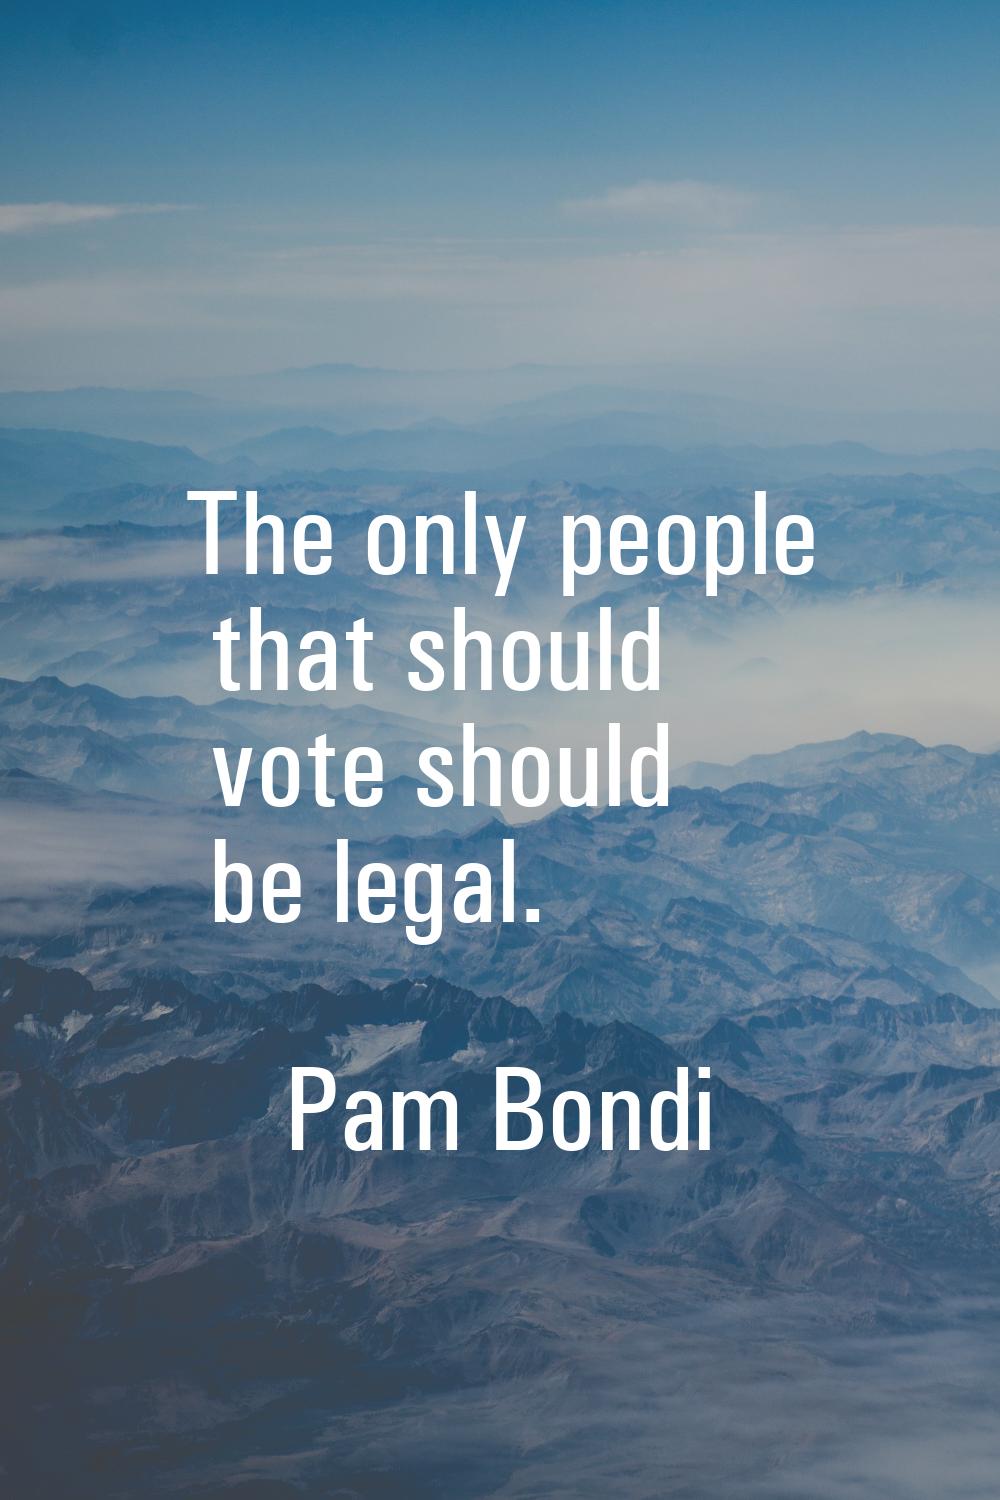 The only people that should vote should be legal.